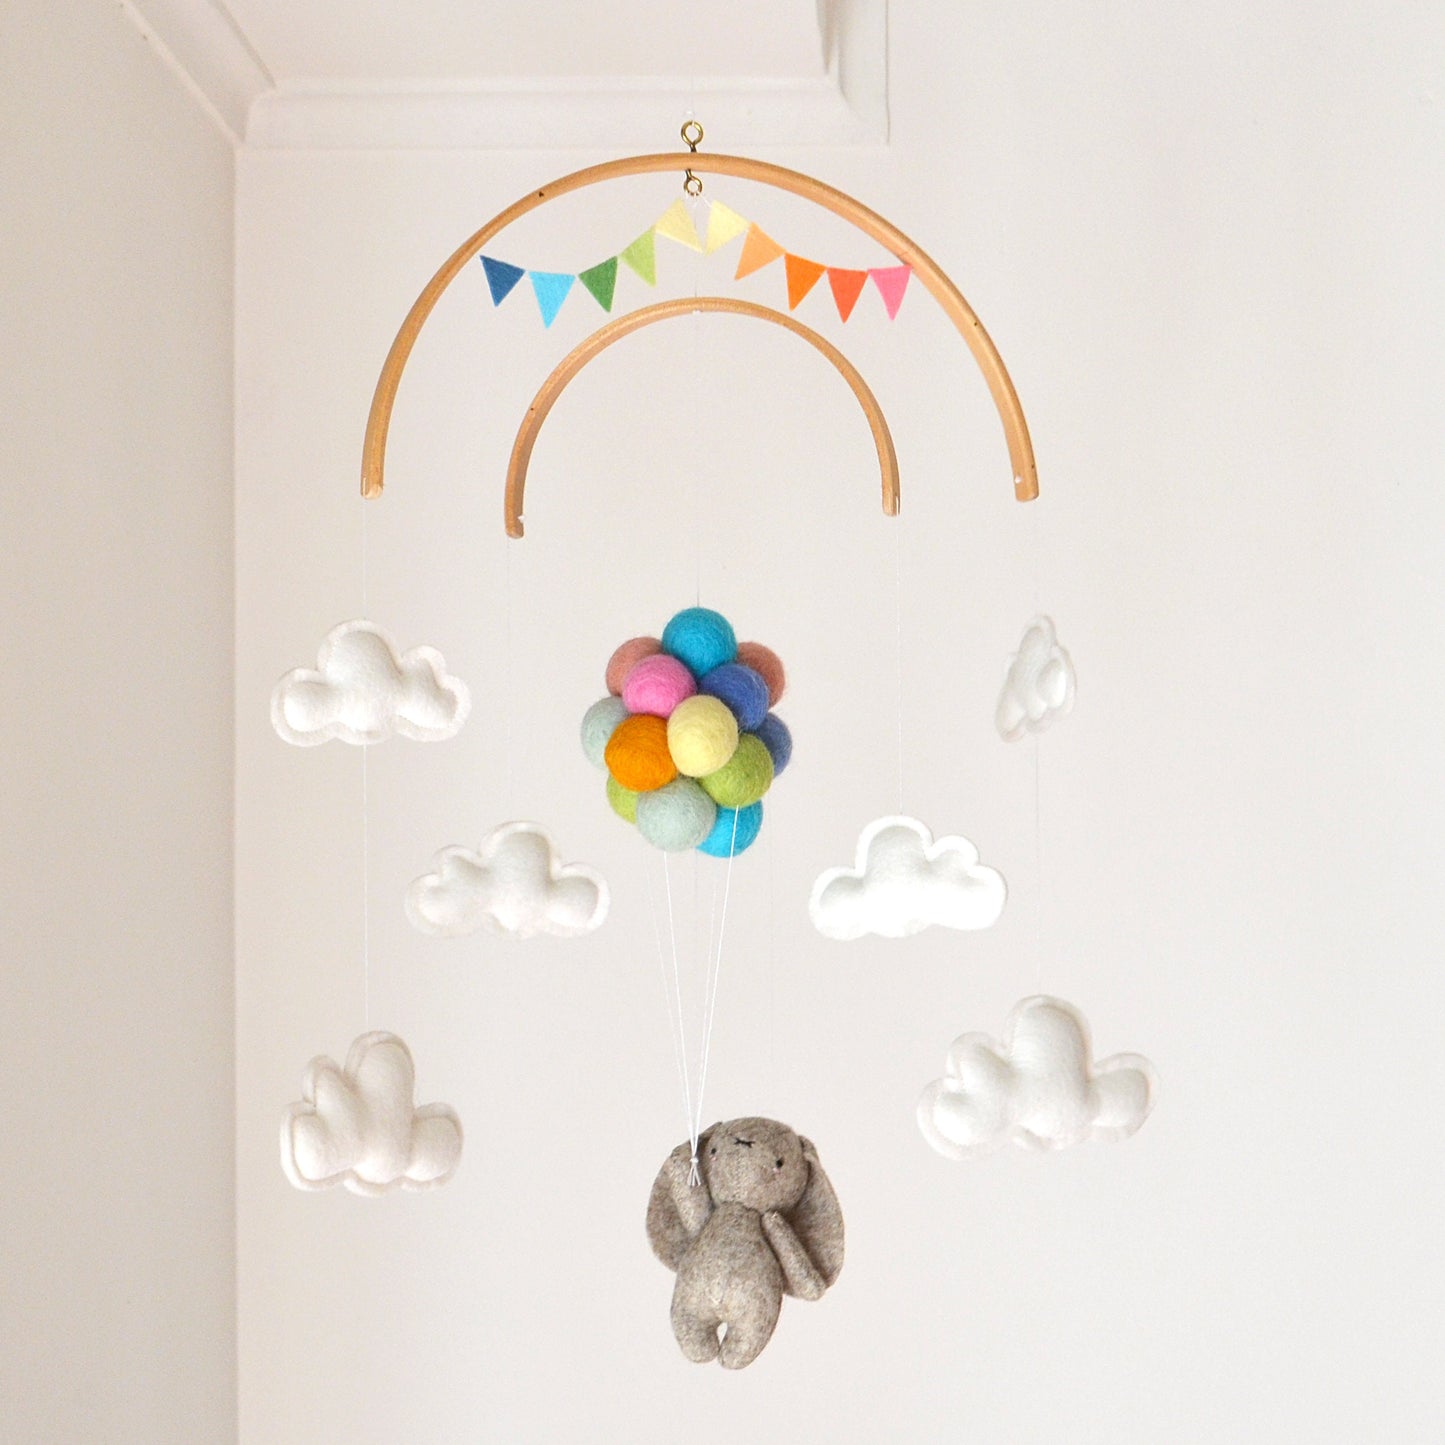 Bunny Flying with Pastel Rainbow Balloons